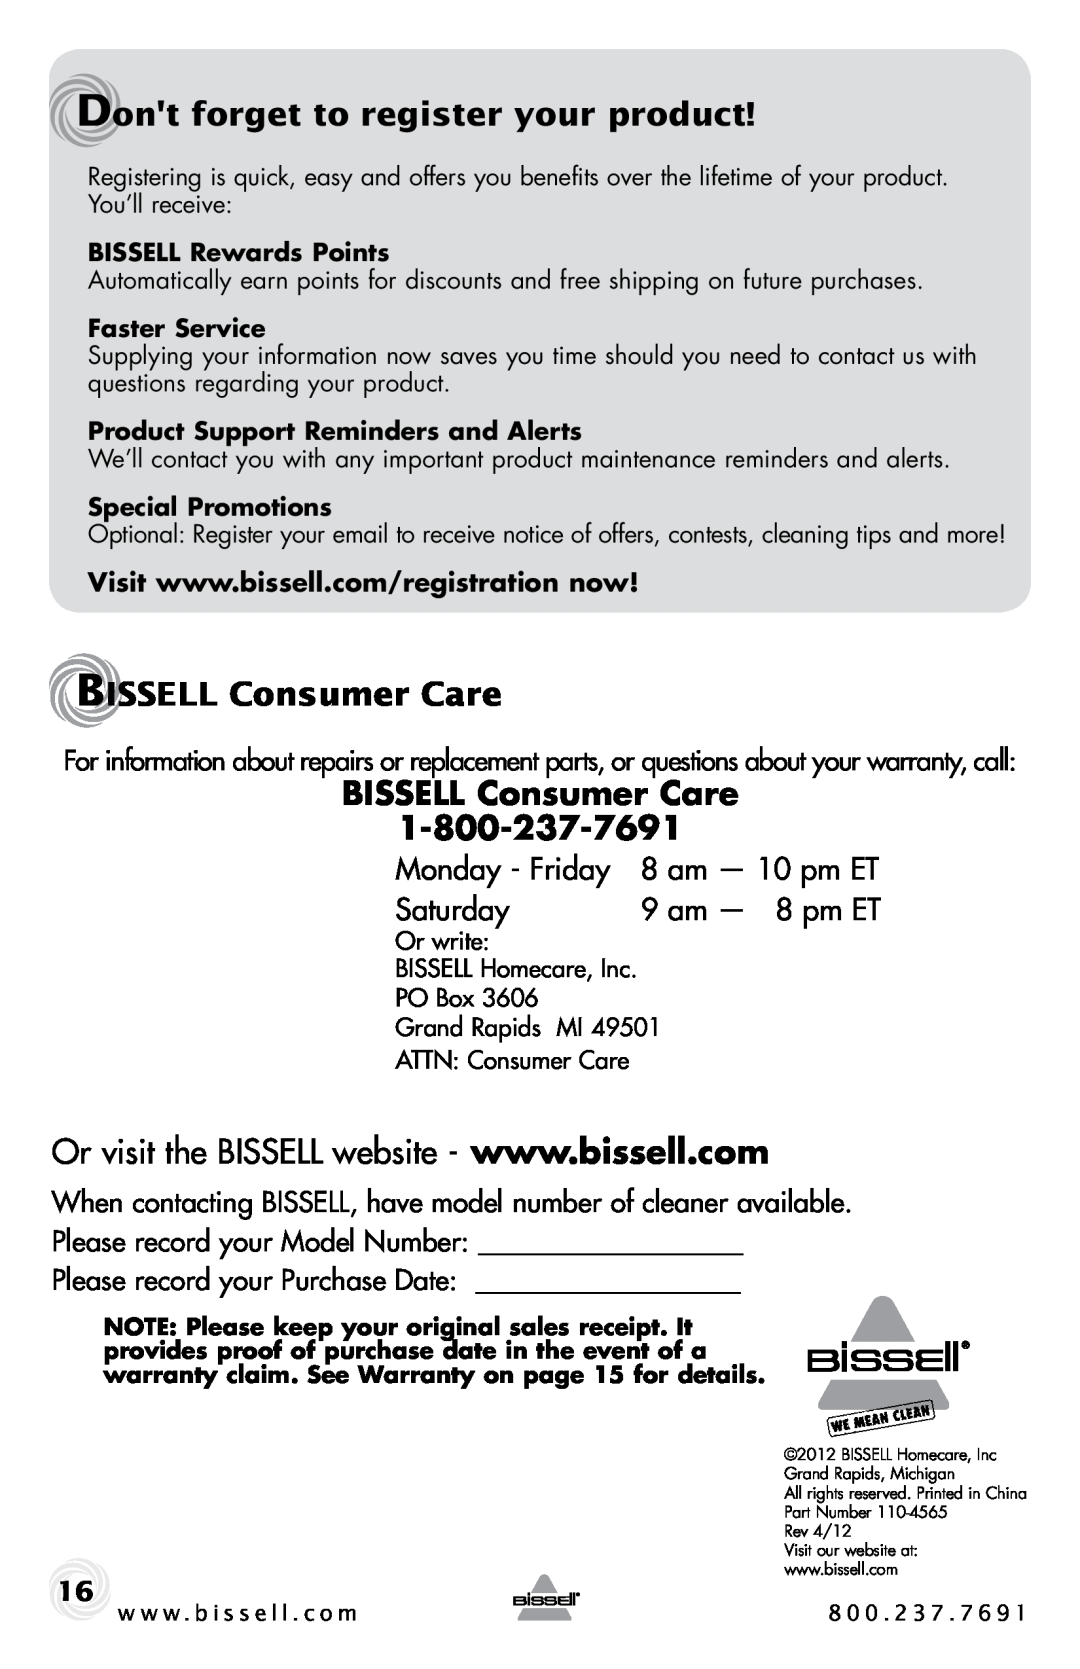 Bissell 6489 warranty Dont forget to register your product, BISSELL Consumer Care, Monday - Friday, Saturday, am - 8 pm ET 